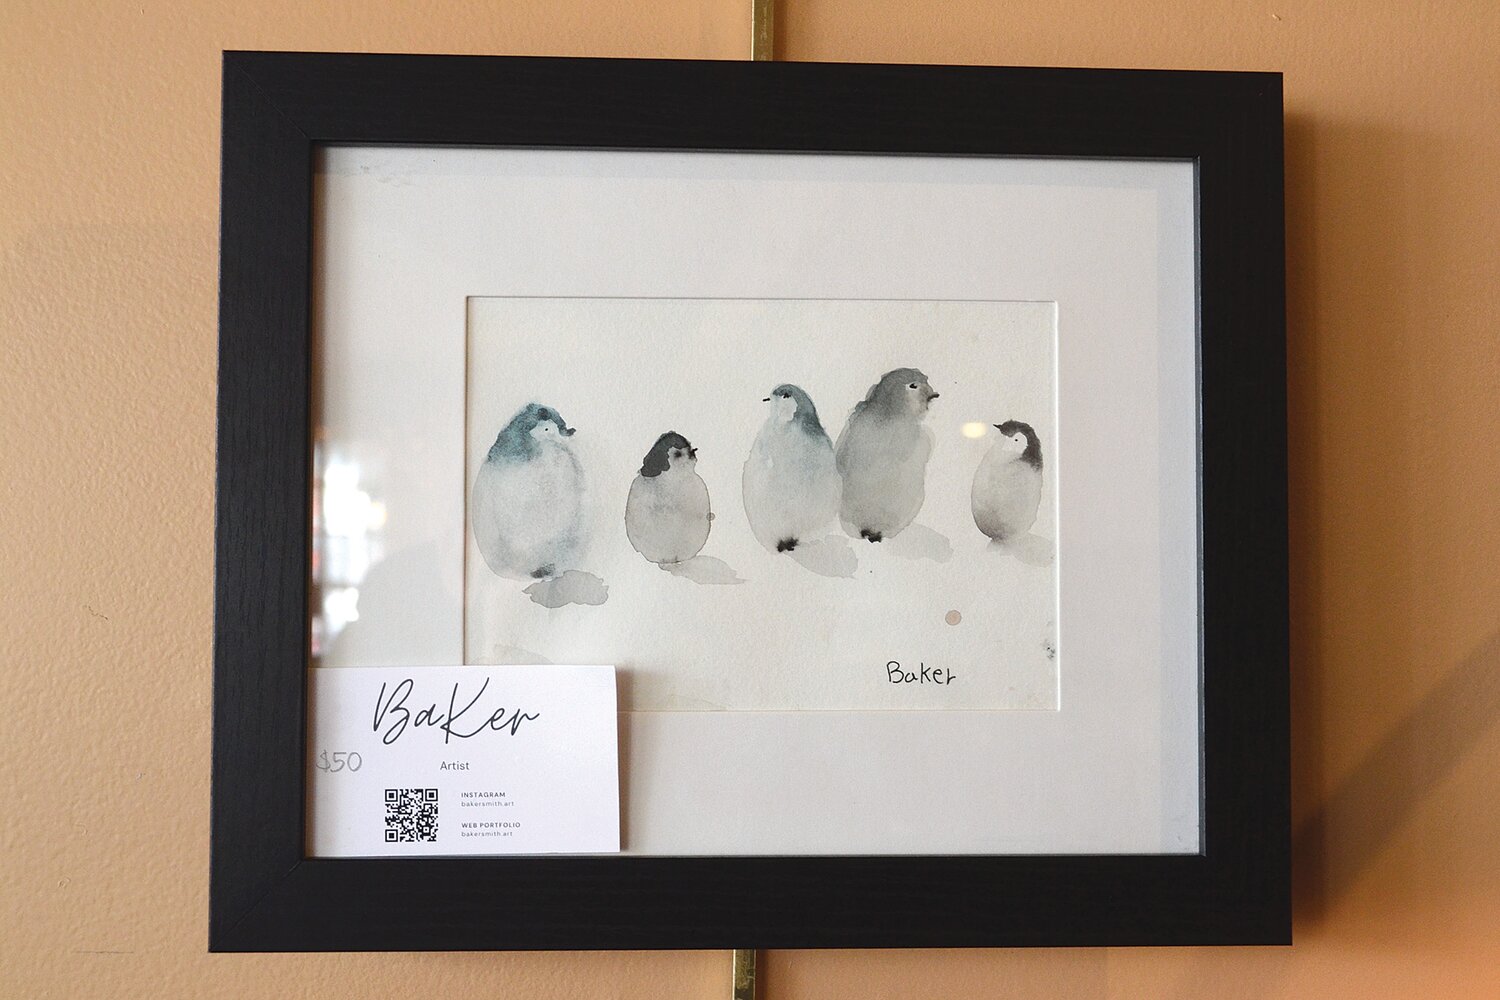 A watercolor painting of penguins Baker has on display, which showcases impressive detail and brushwork.